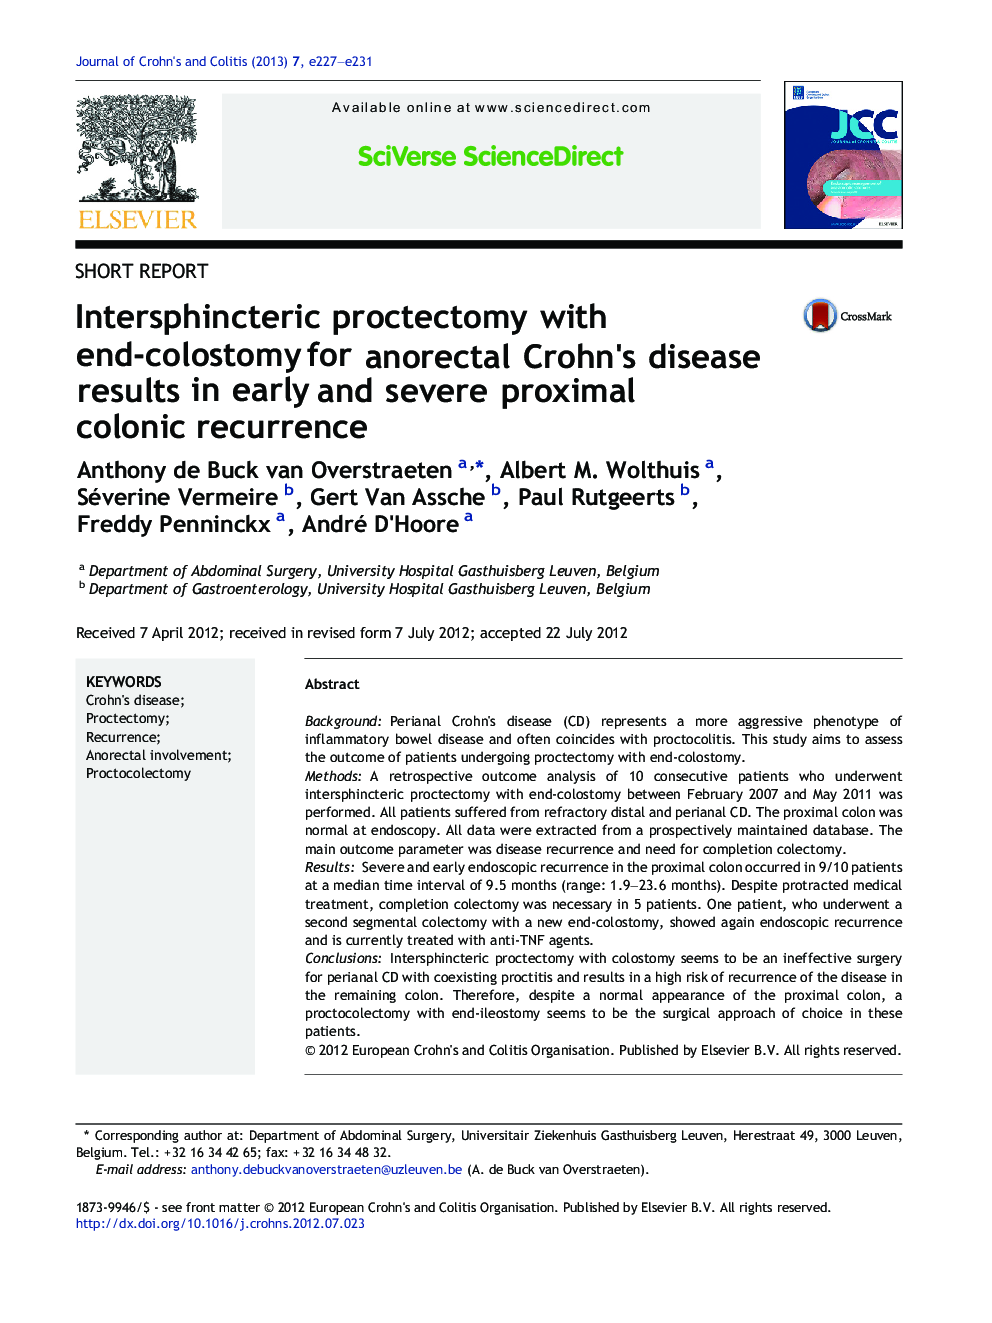 Intersphincteric proctectomy with end-colostomy for anorectal Crohn's disease results in early and severe proximal colonic recurrence